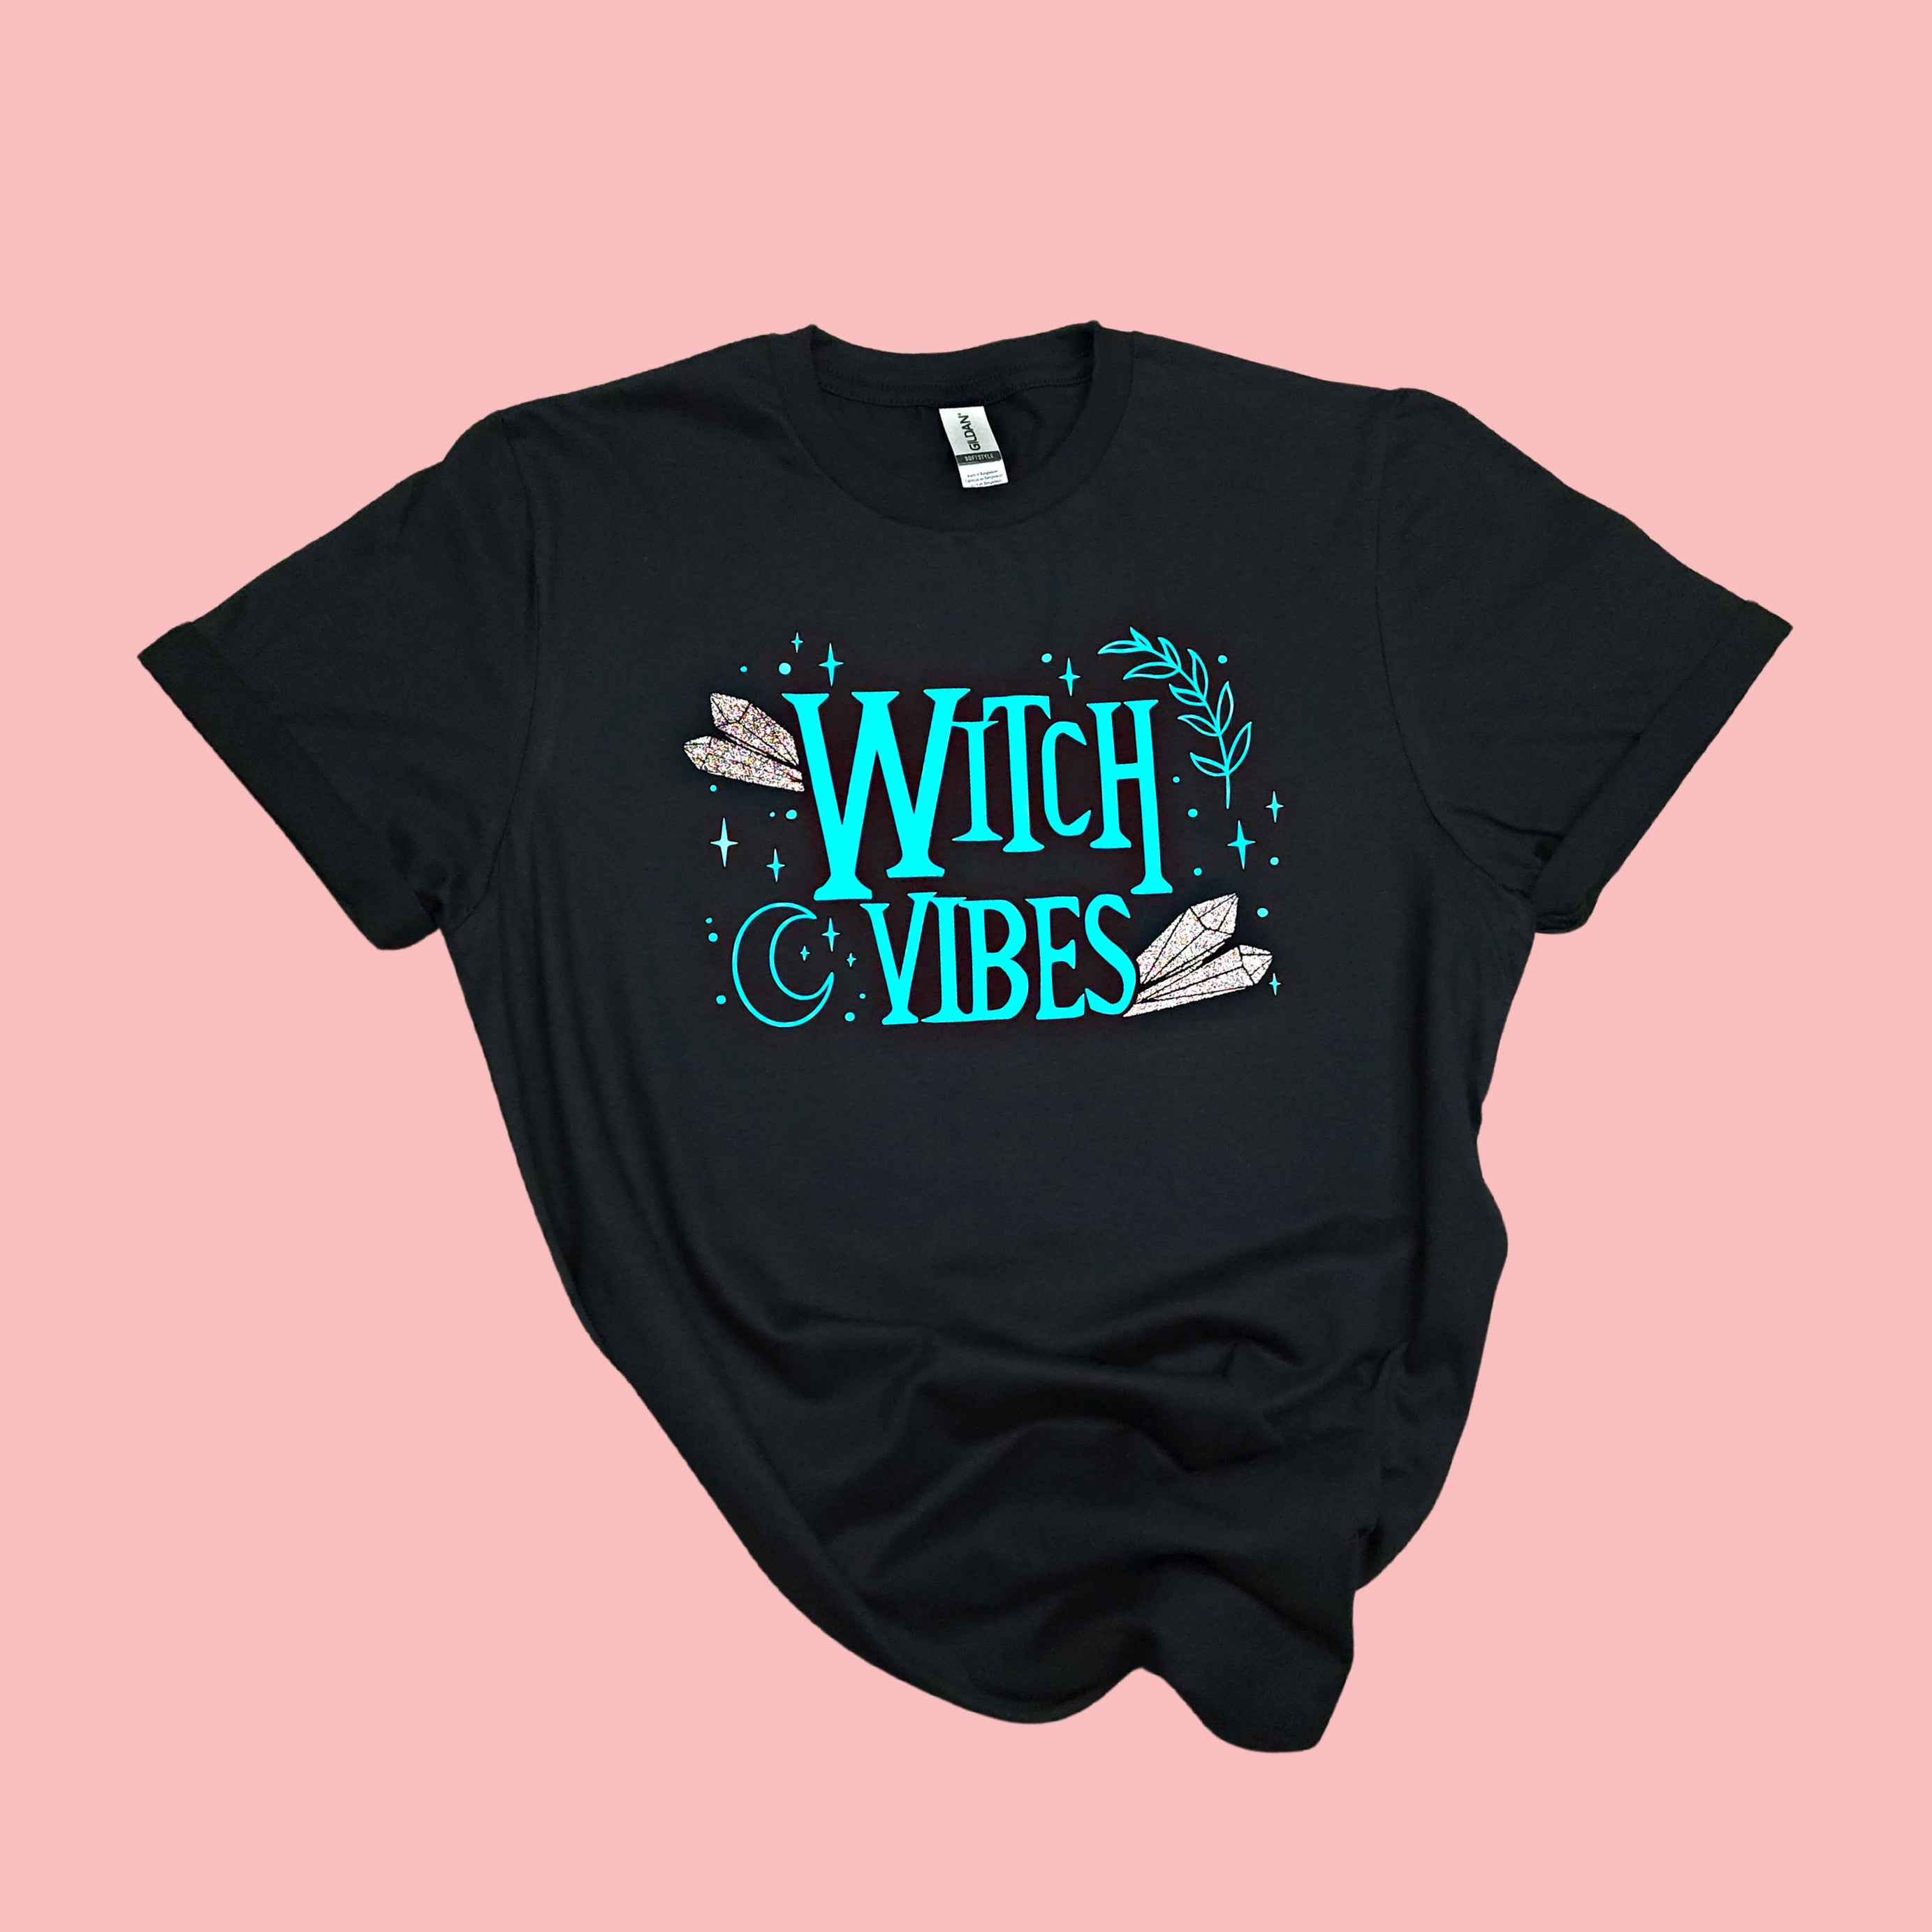 Witch Vibes Graphic Tee with Purple Holographic Glitter Crystals - Unisex